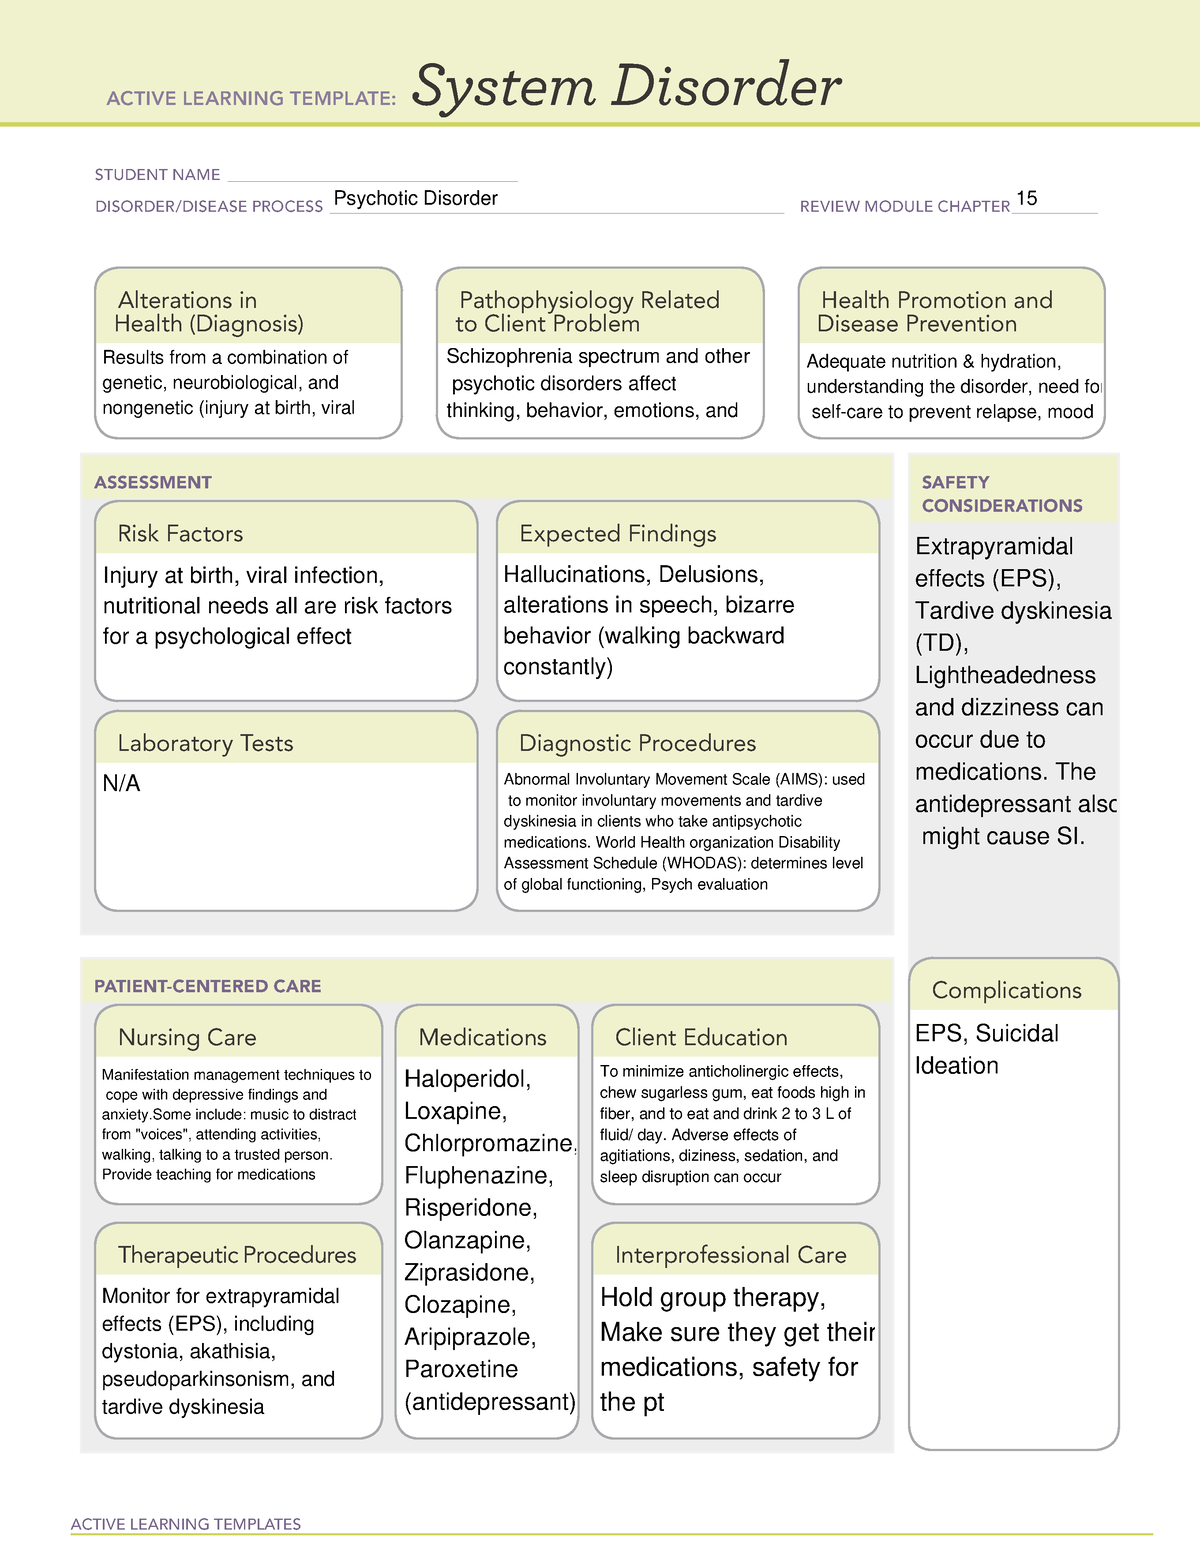 System Disorder Psychotic Disorder ATI A ACTIVE LEARNING TEMPLATES